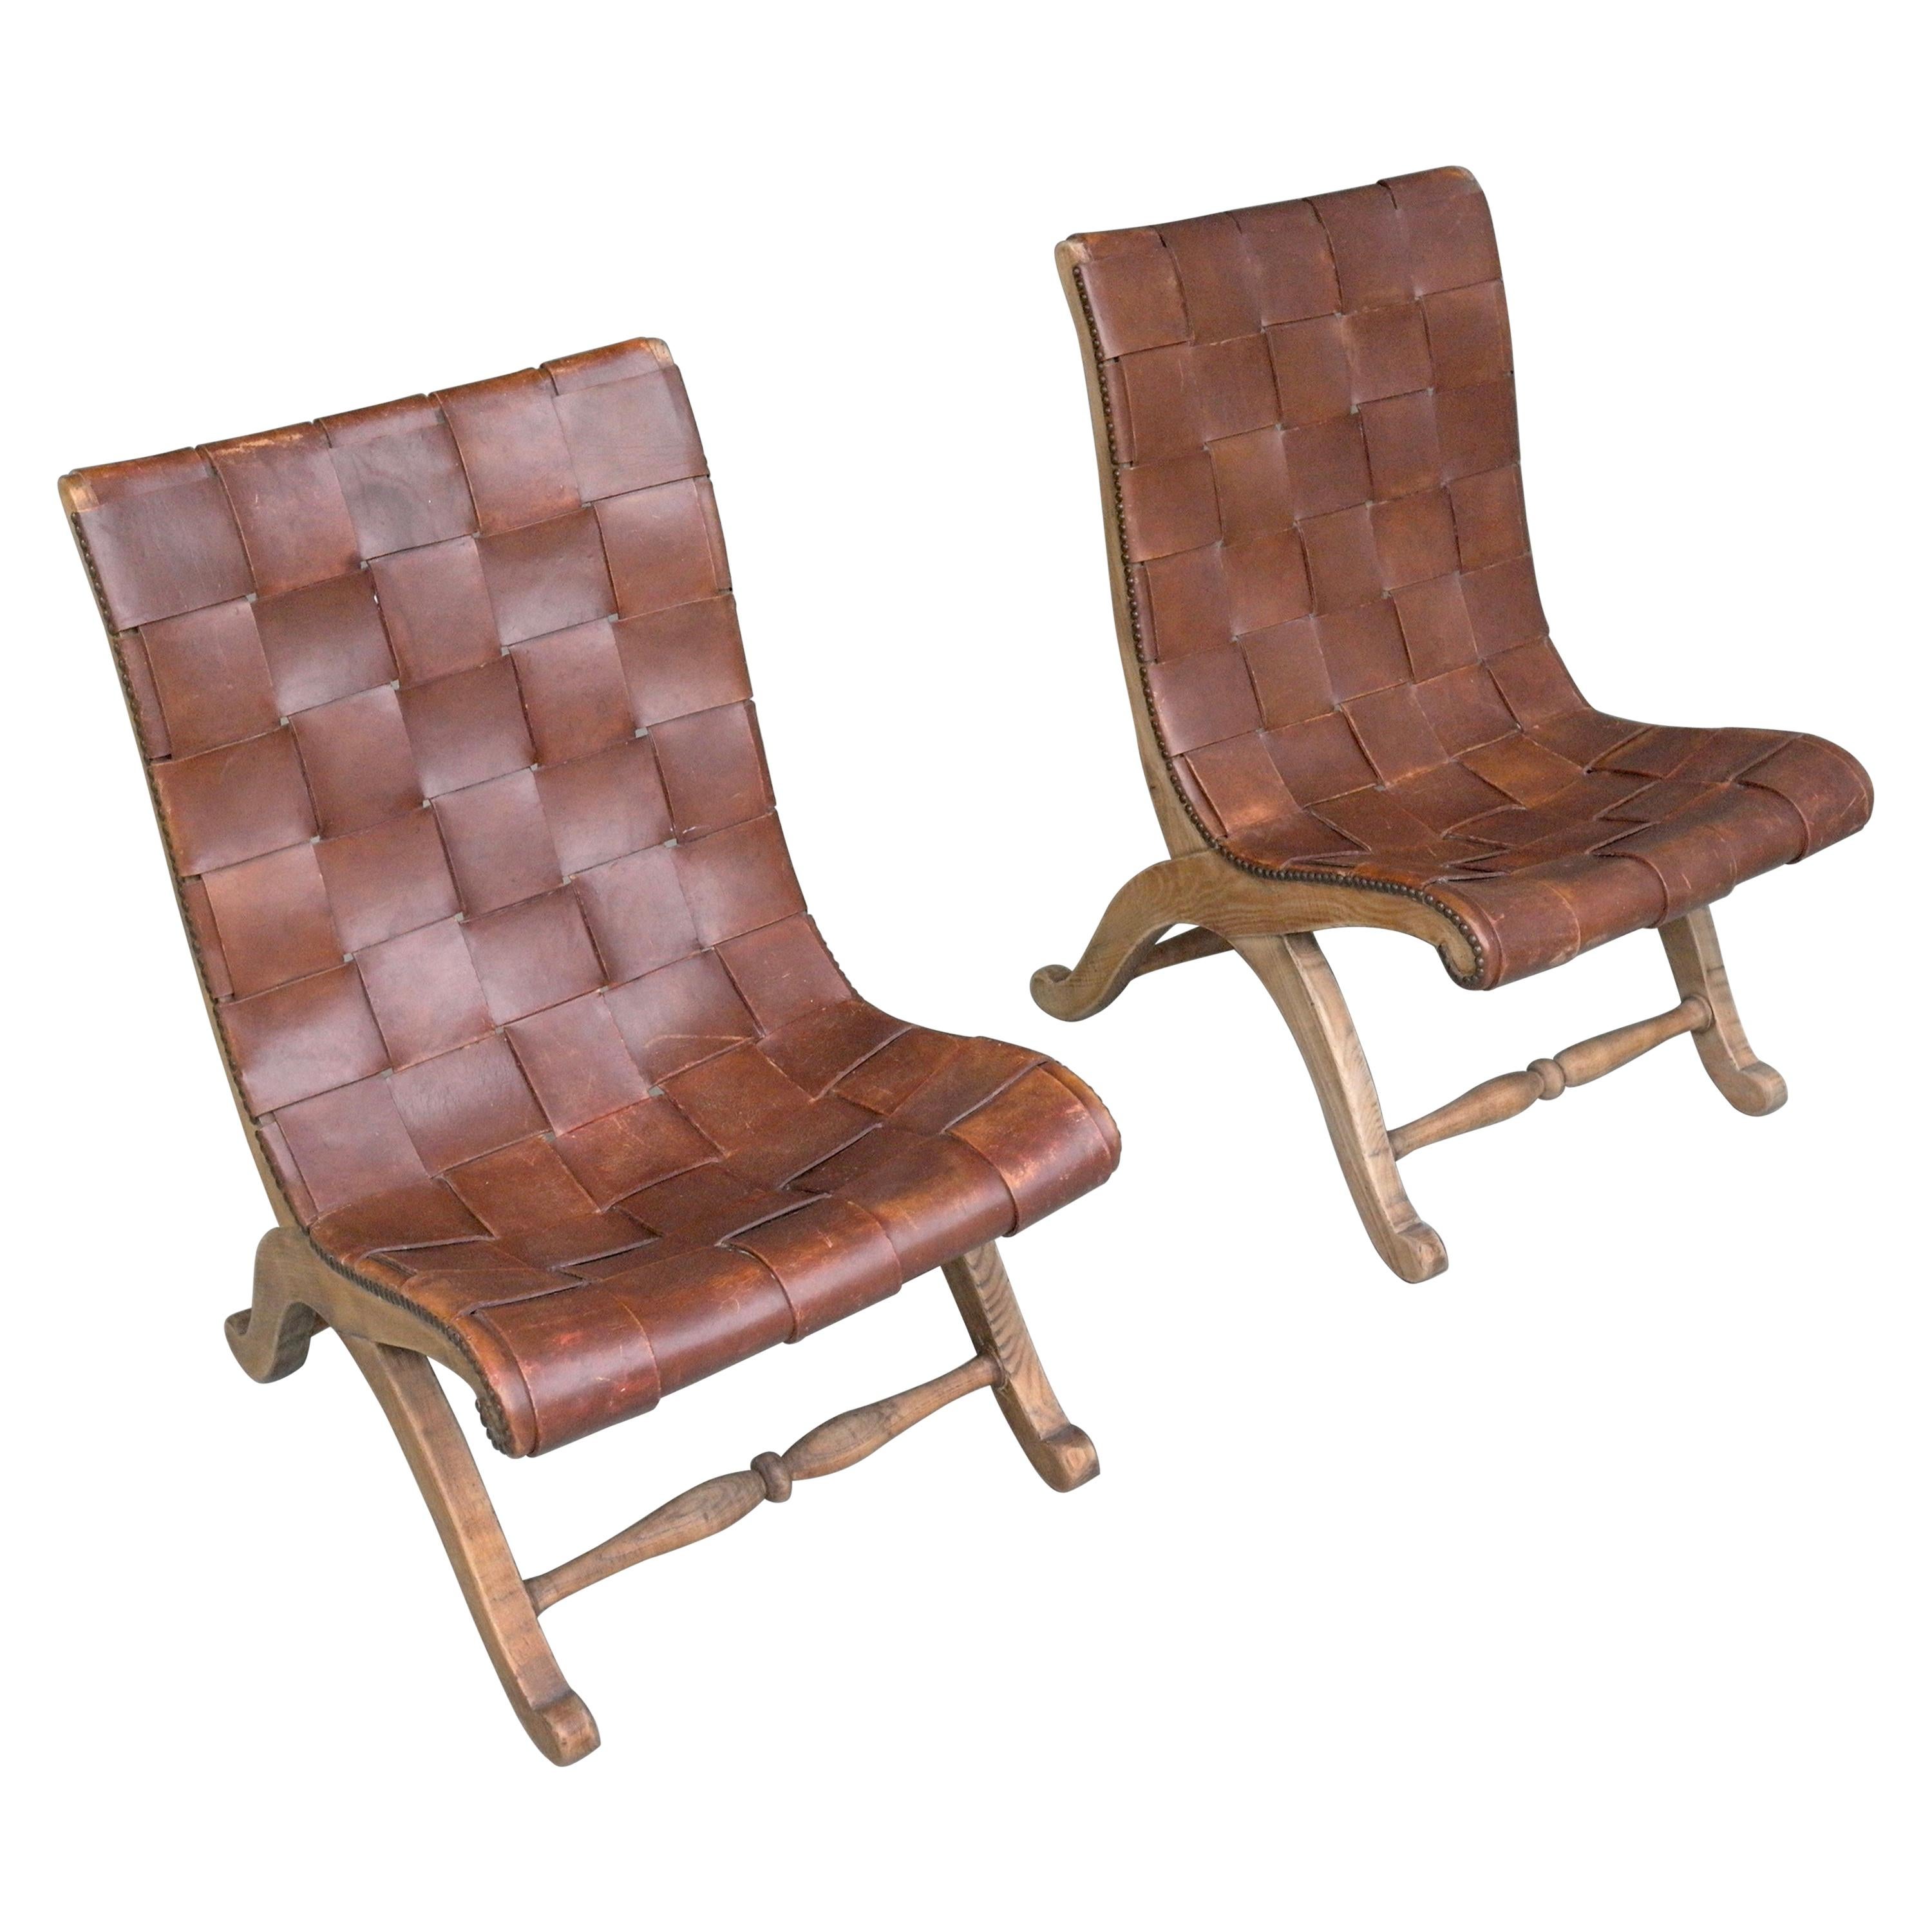 Pair of Valenti Spanish leather armchairs attributed to Pierre Lottier made circa 1950s. Curved Oak frame with brass nailhead details and original Cognac strap leather with lovely Patina. 

Pierre Lottier was born in France before moving to Spain